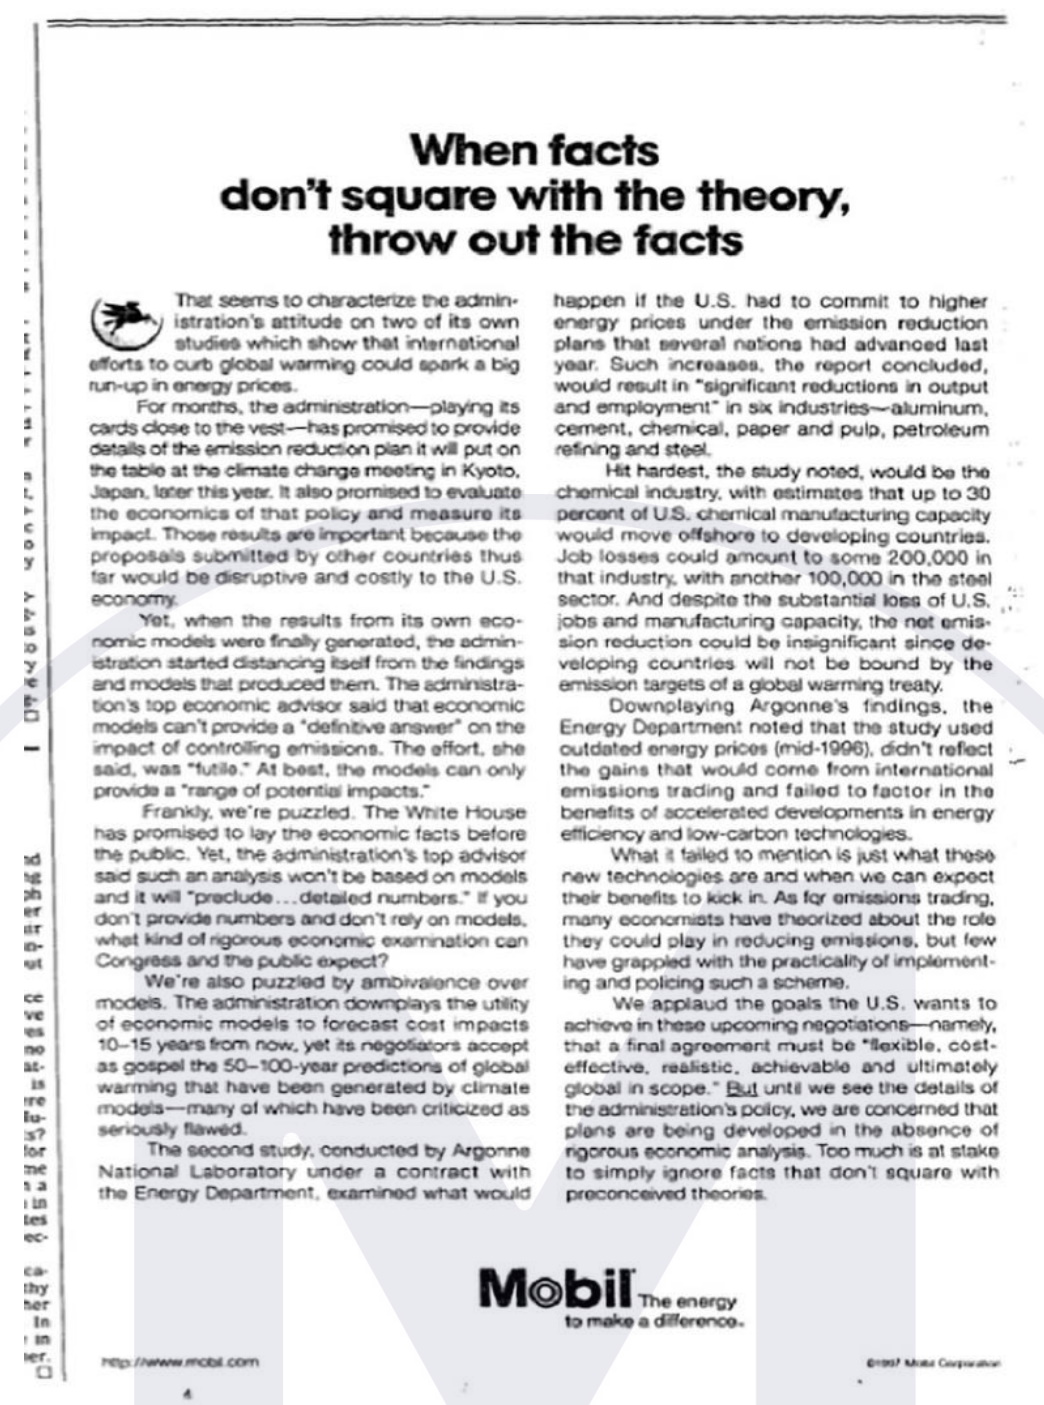 Mobil’s 1997 advertorial in The New York Times argued that economic analysis of emissions restrictions was faulty and inconclusive and therefore a justification for delaying action on climate change. In August 1997, a few months before the Kyoto Conference on Climate Change, the Global Climate Coalition (GCC) helped launch a massive advertising campaign designed to prevent the United States from endorsing any meaningful agreement to reduce global carbon emissions. Graphic: Municipalities of Puerto Rico v. Fossil Fuel Companies